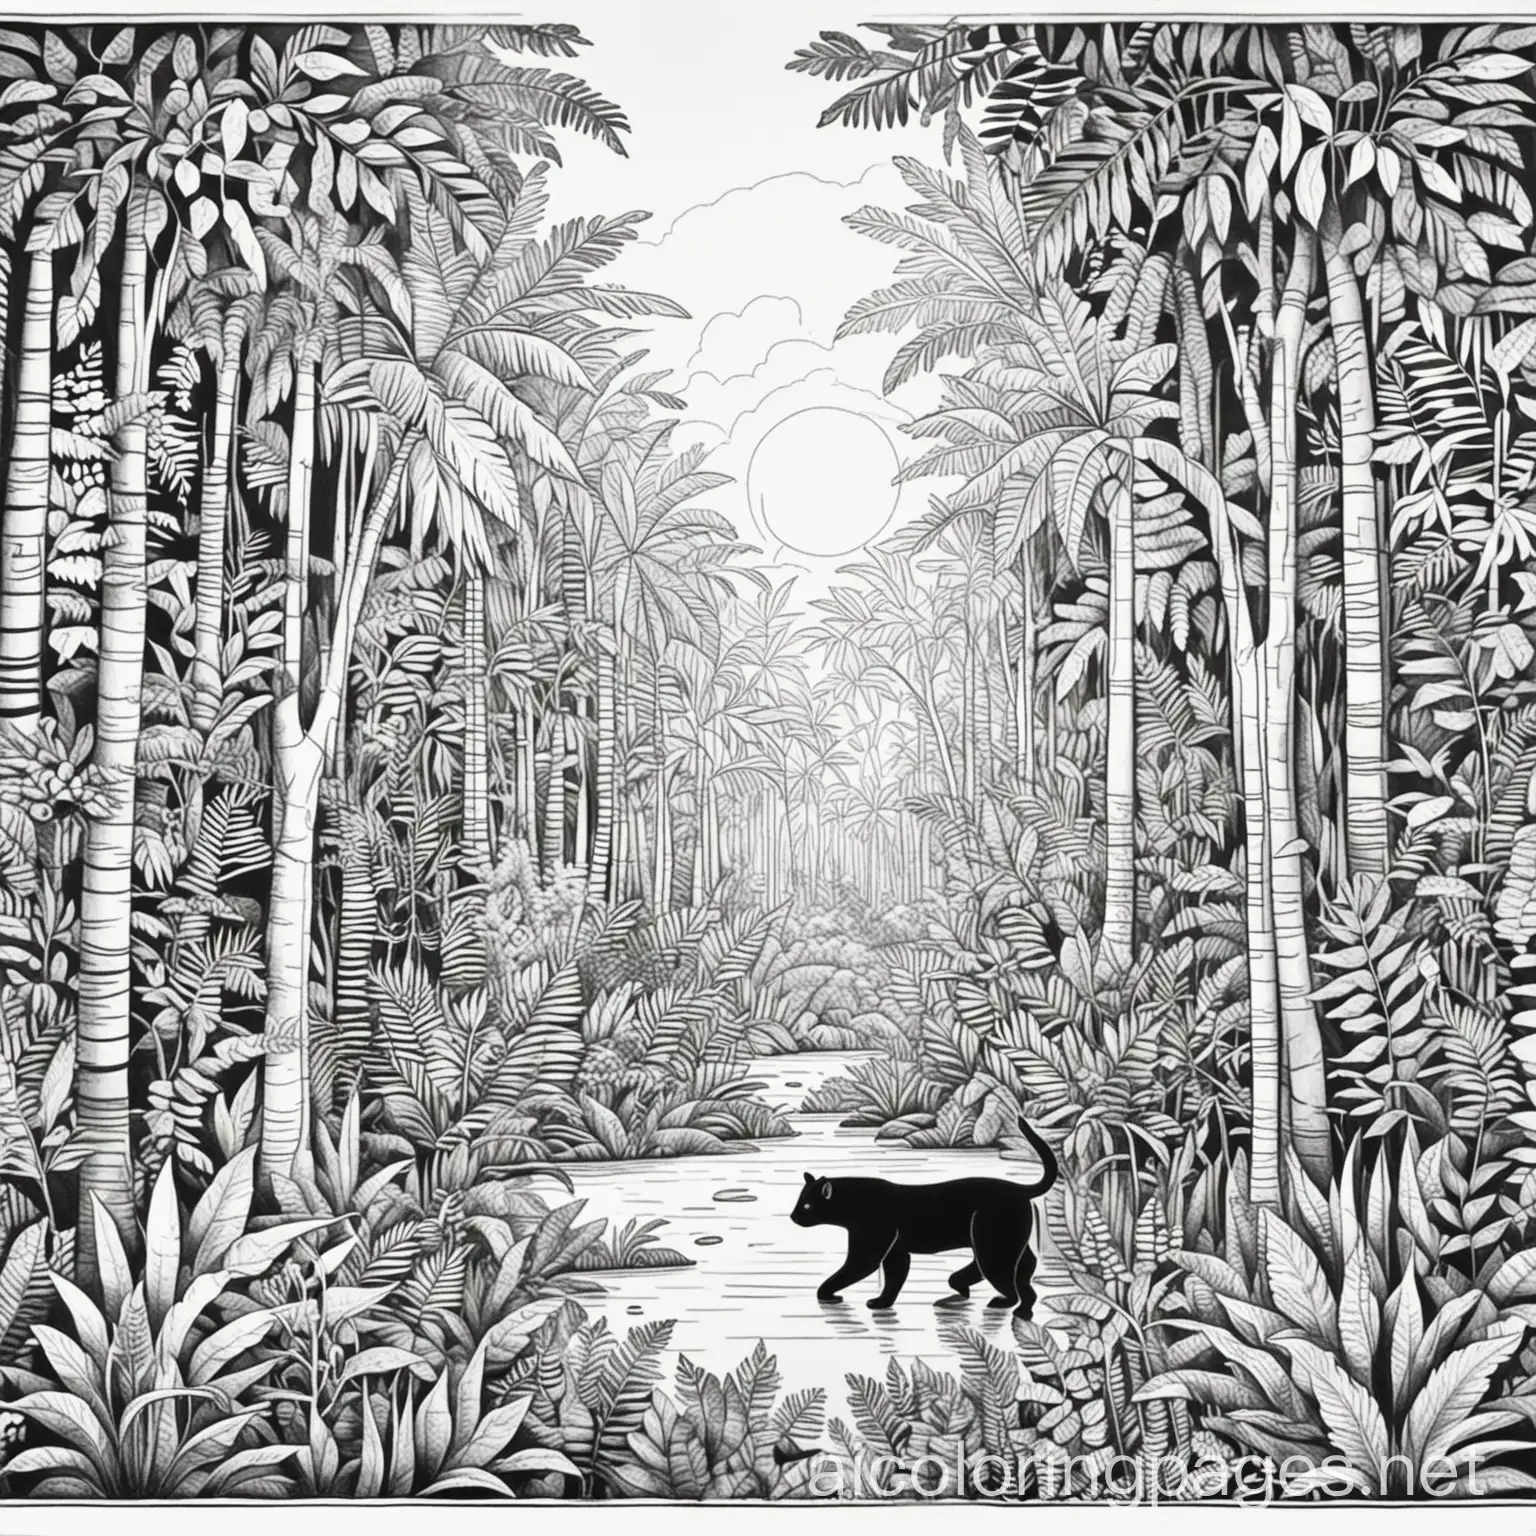 Henri Rousseau style jungle scene, Coloring Page, black and white, line art, white background, Simplicity, Ample White Space. The background of the coloring page is plain white to make it easy for young children to color within the lines. The outlines of all the subjects are easy to distinguish, making it simple for kids to color without too much difficulty